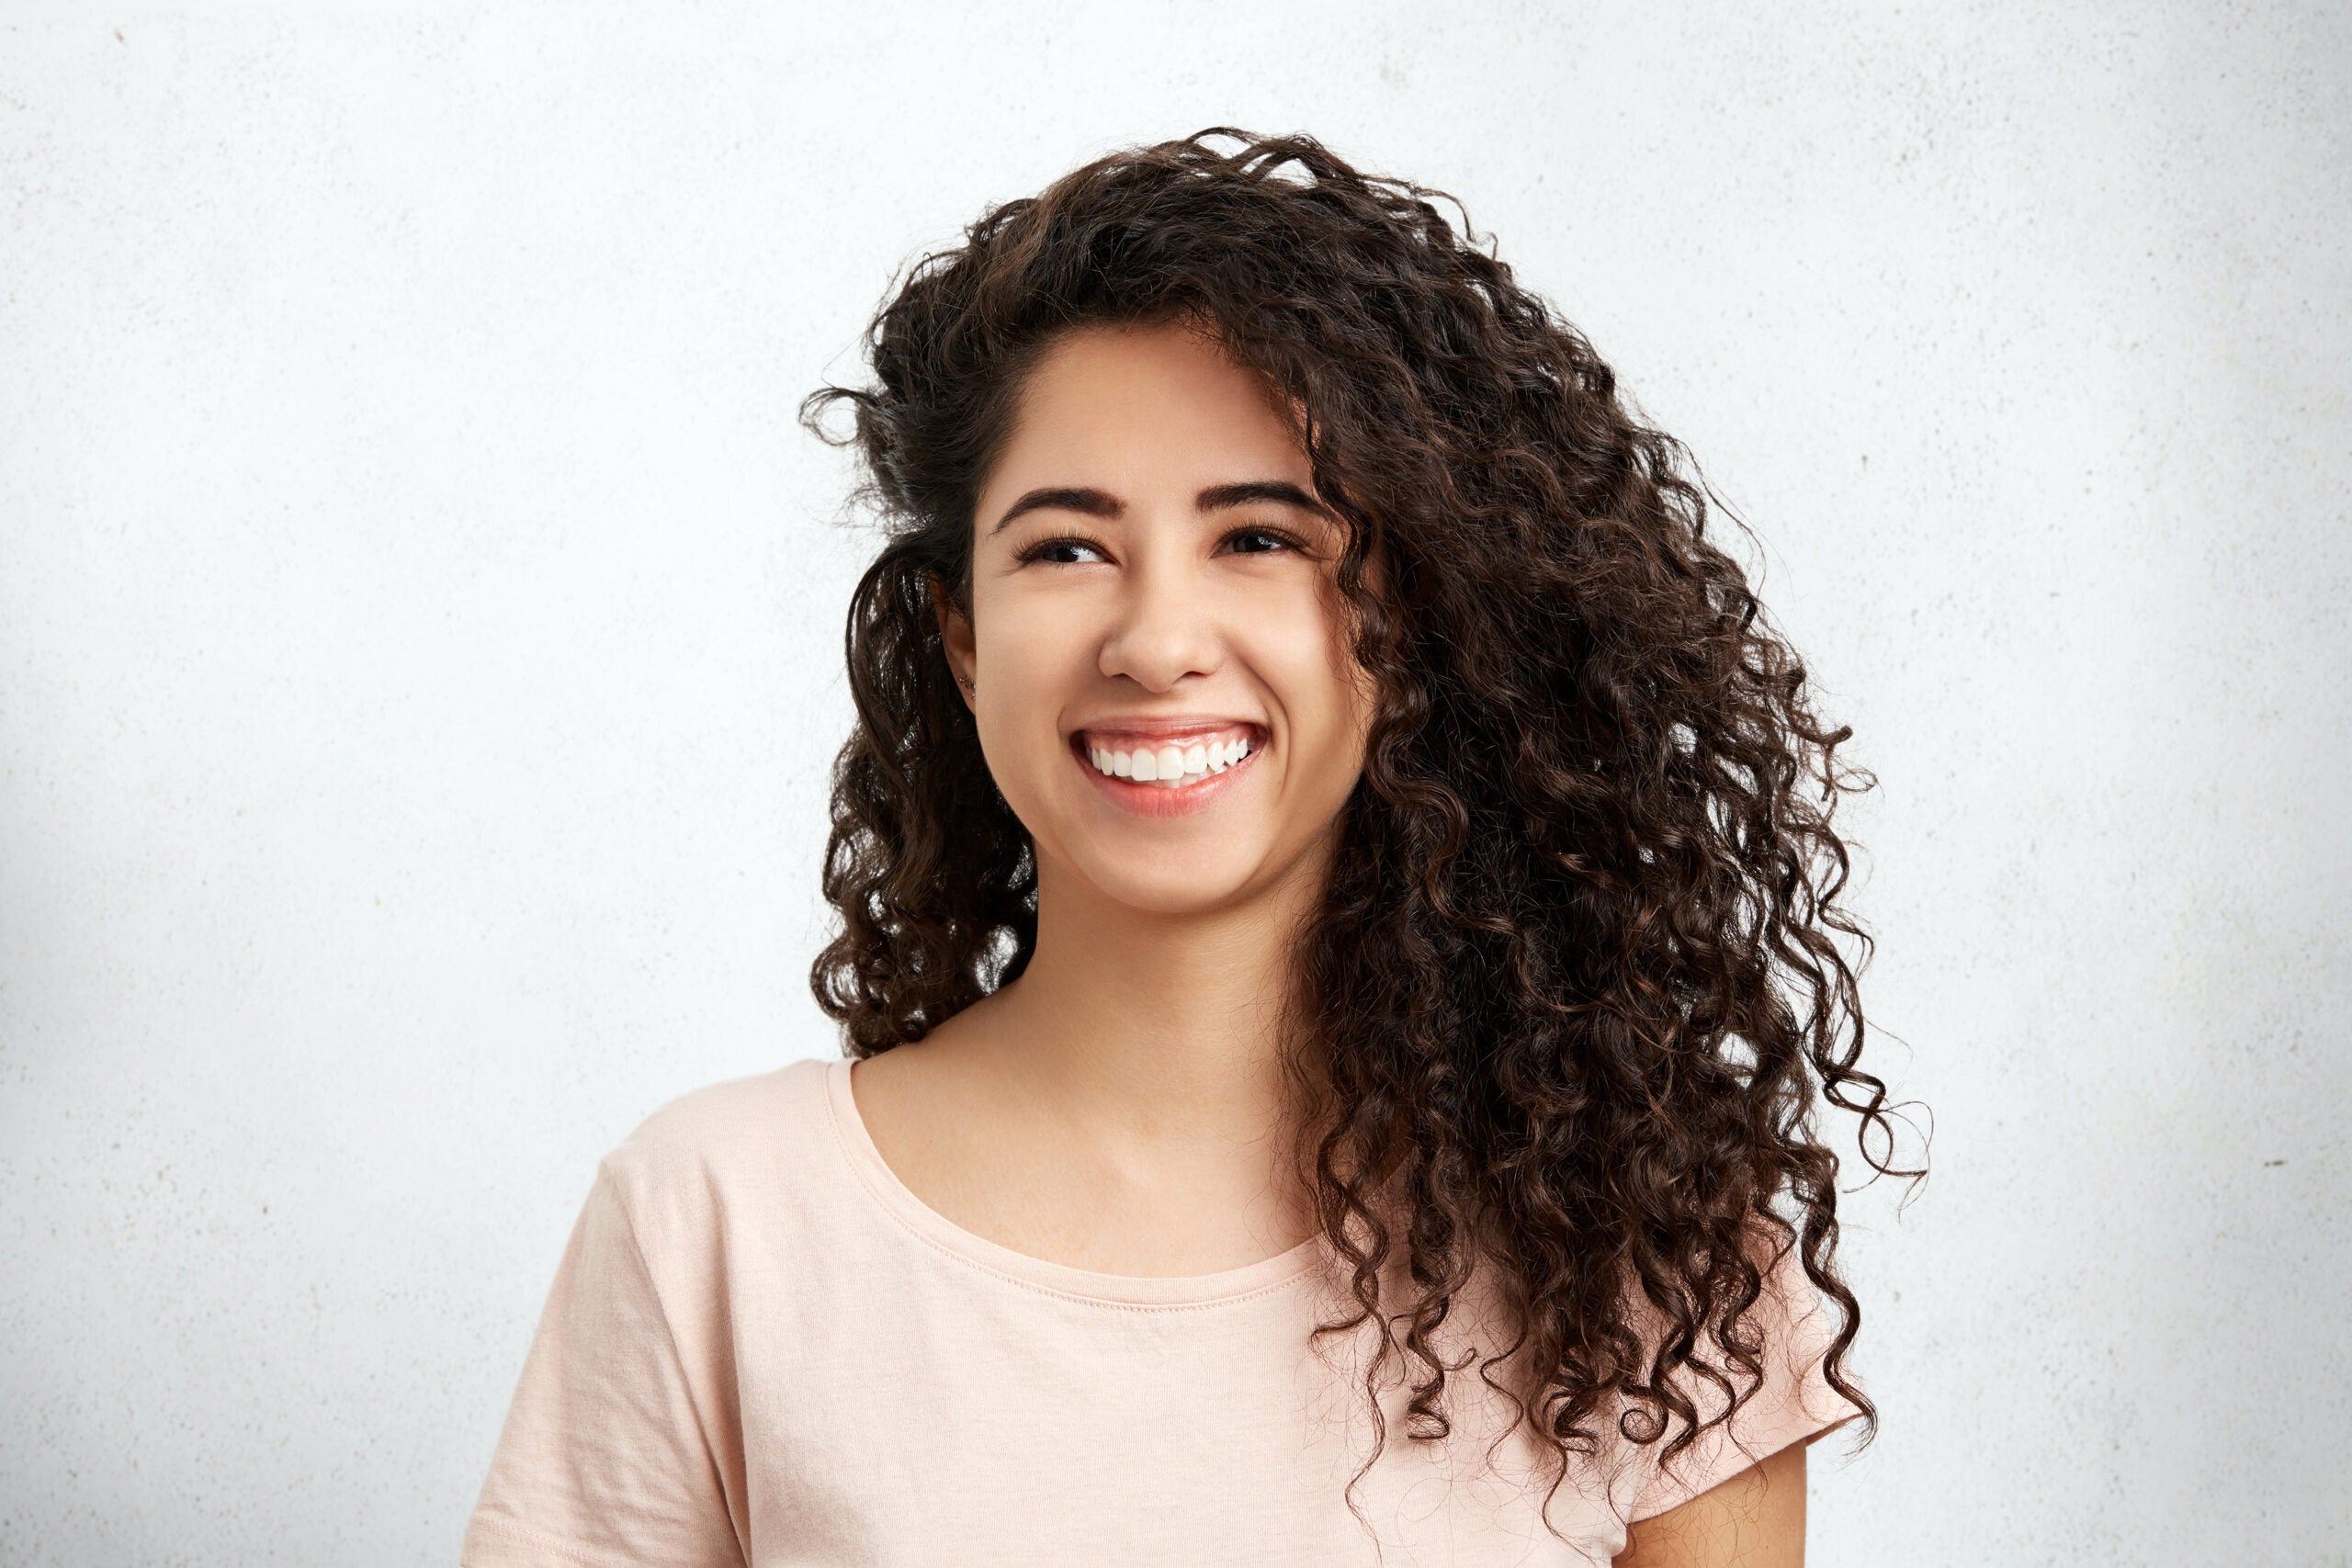 Young woman with curly hair smiling with bold brows and wispy lashes